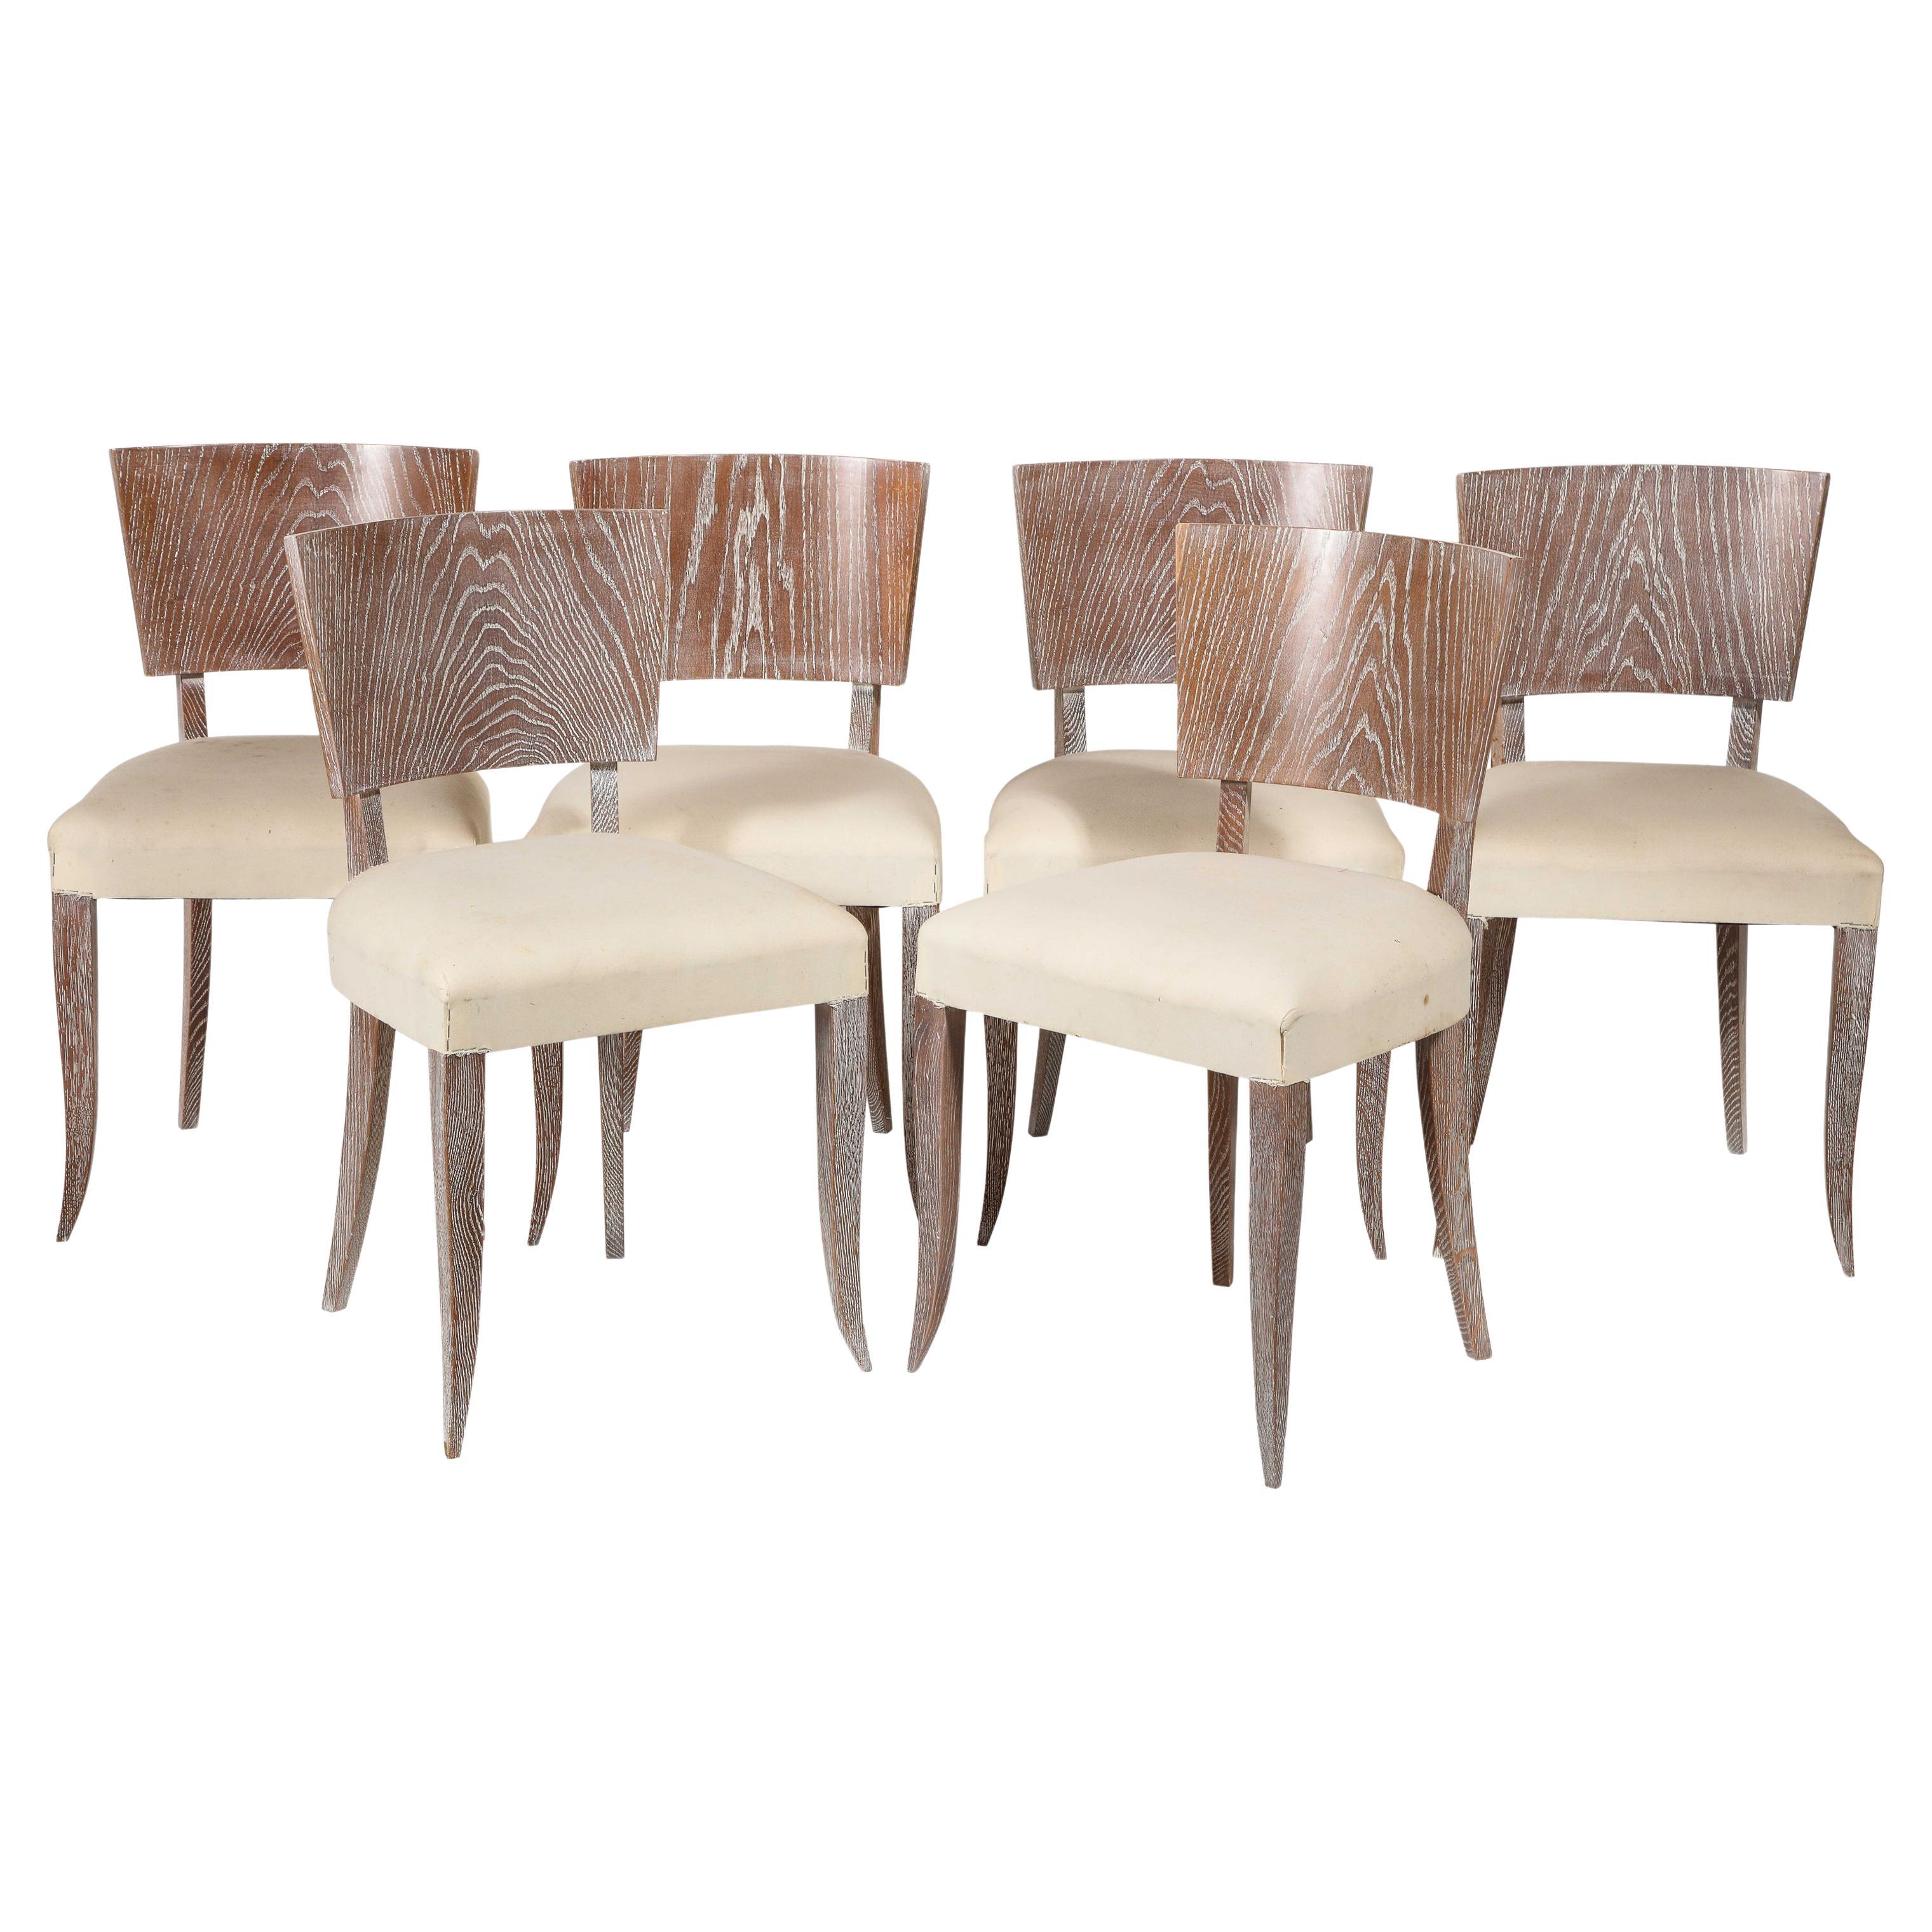 6 French Art Deco Cerused Oak White Dining Chairs, 1930s For Sale